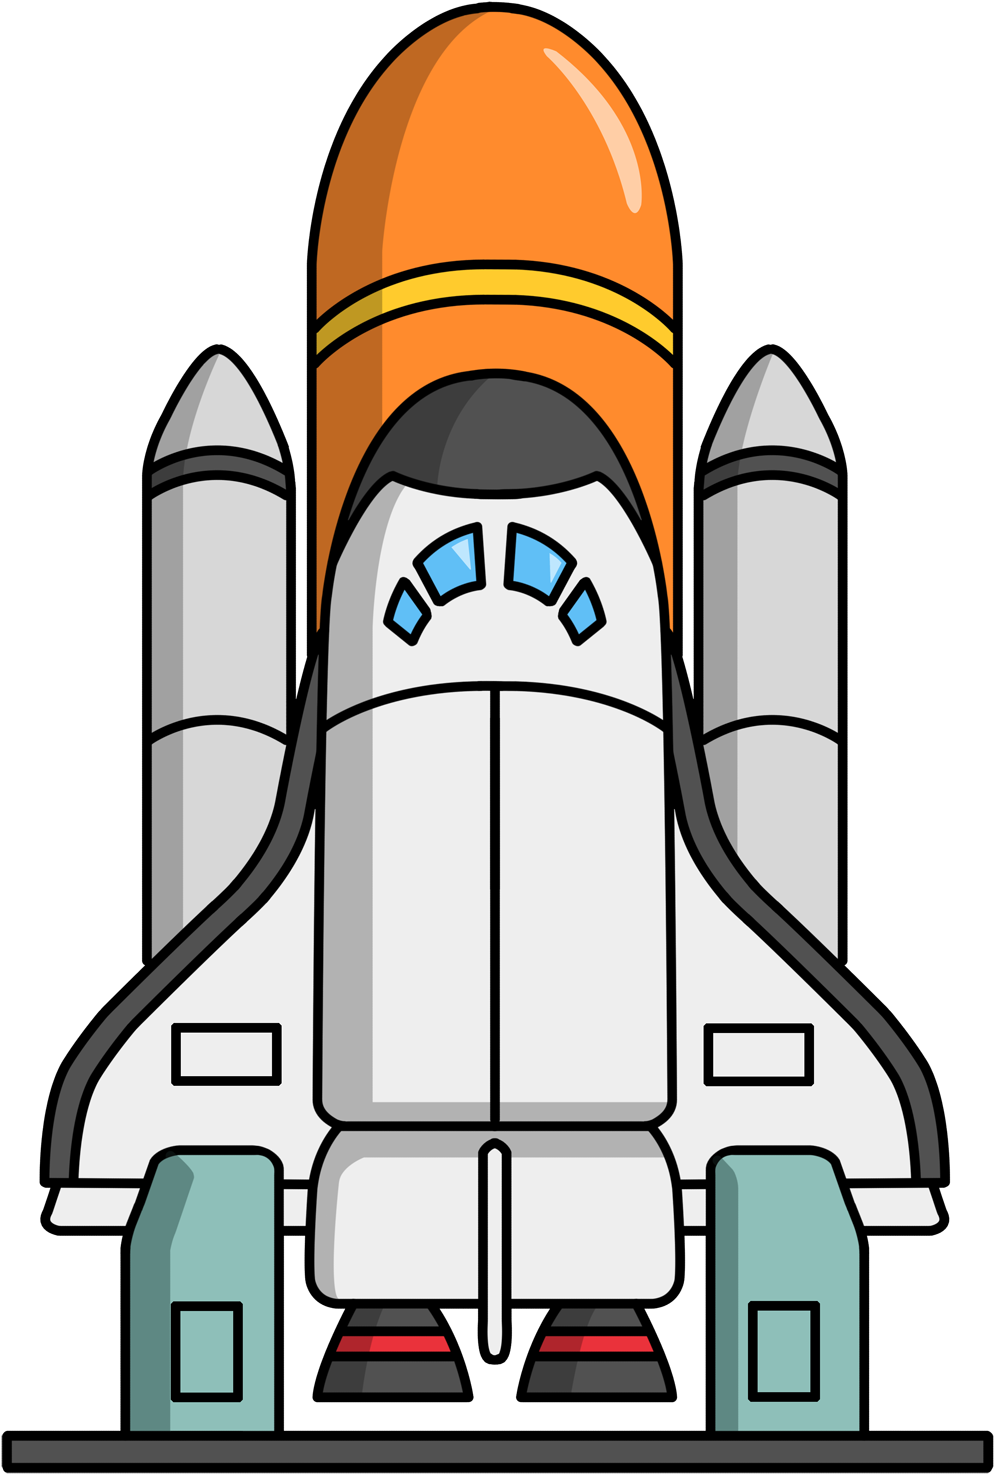 Space Clip Art For Kids Free Clipart Images - Space Shuttle Cartoon (1200x1600)